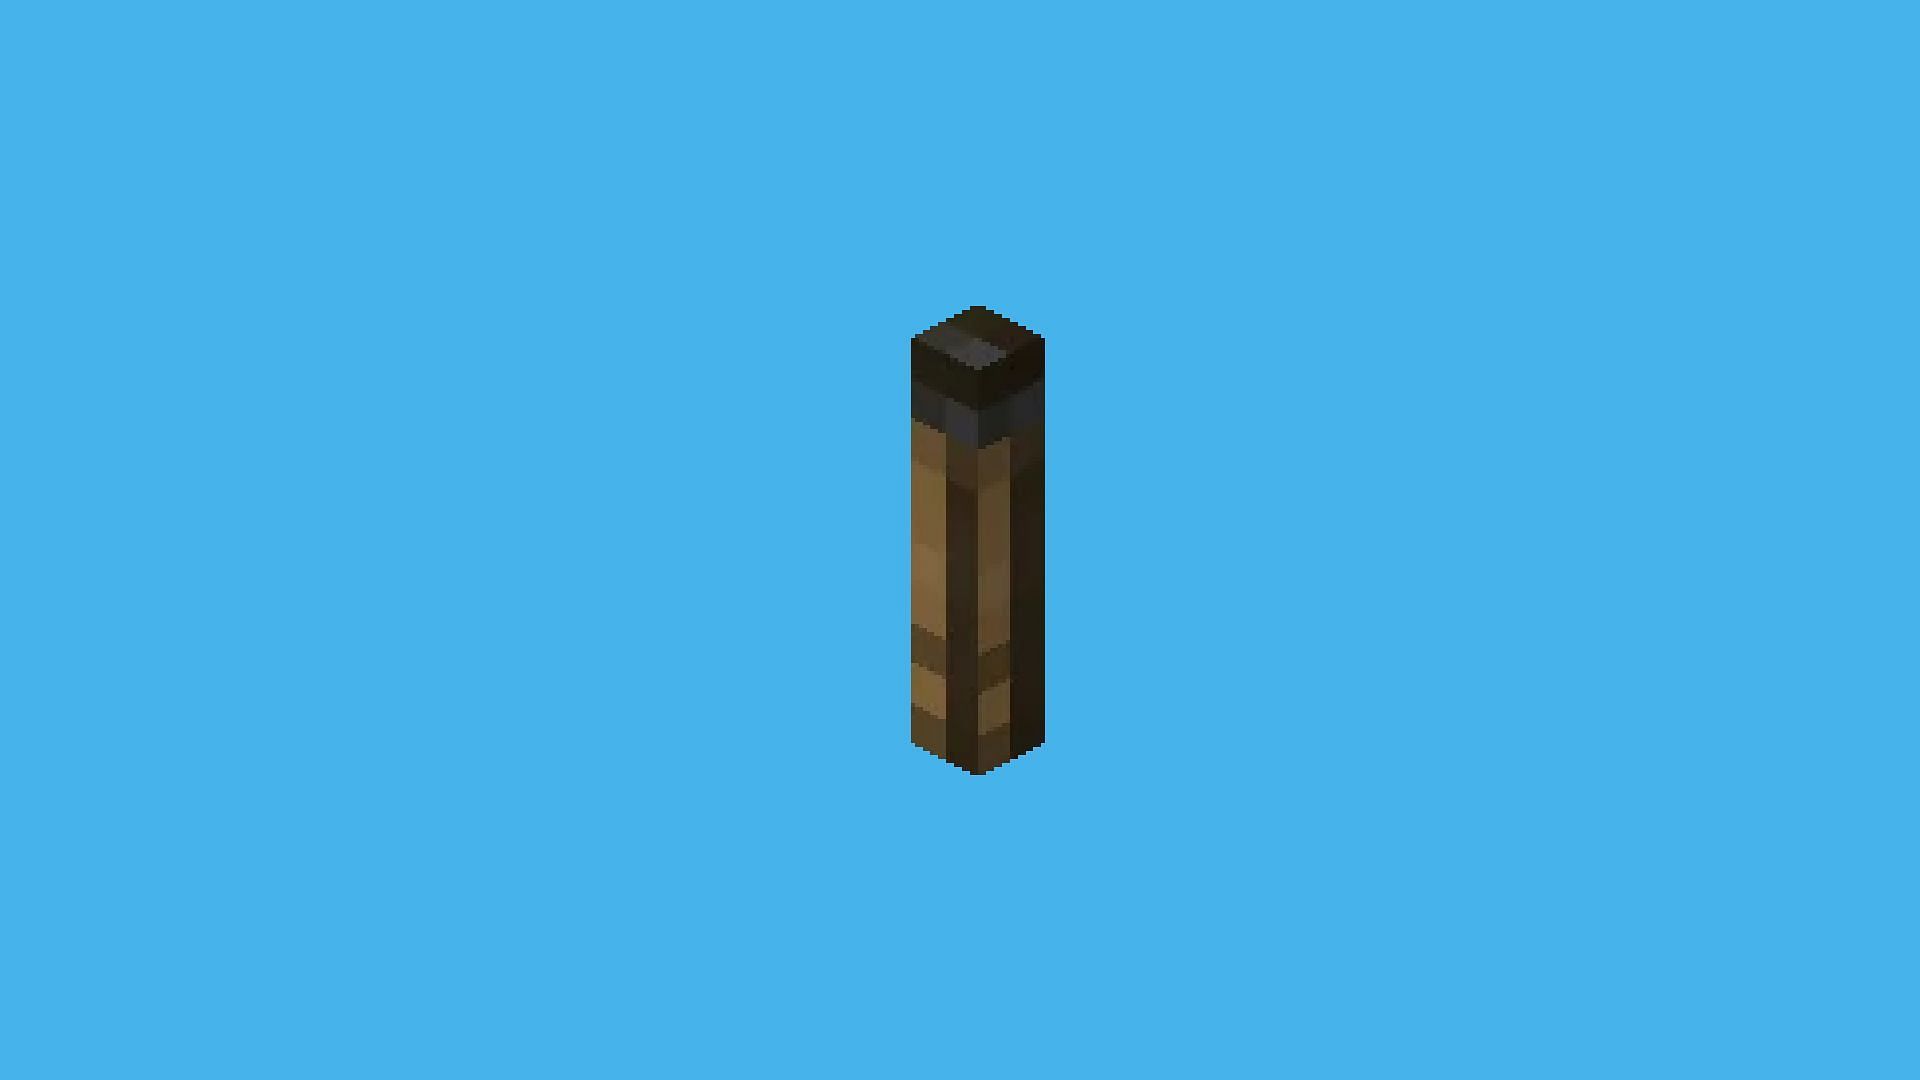 Burnt-out torch (Image via Minecraft)